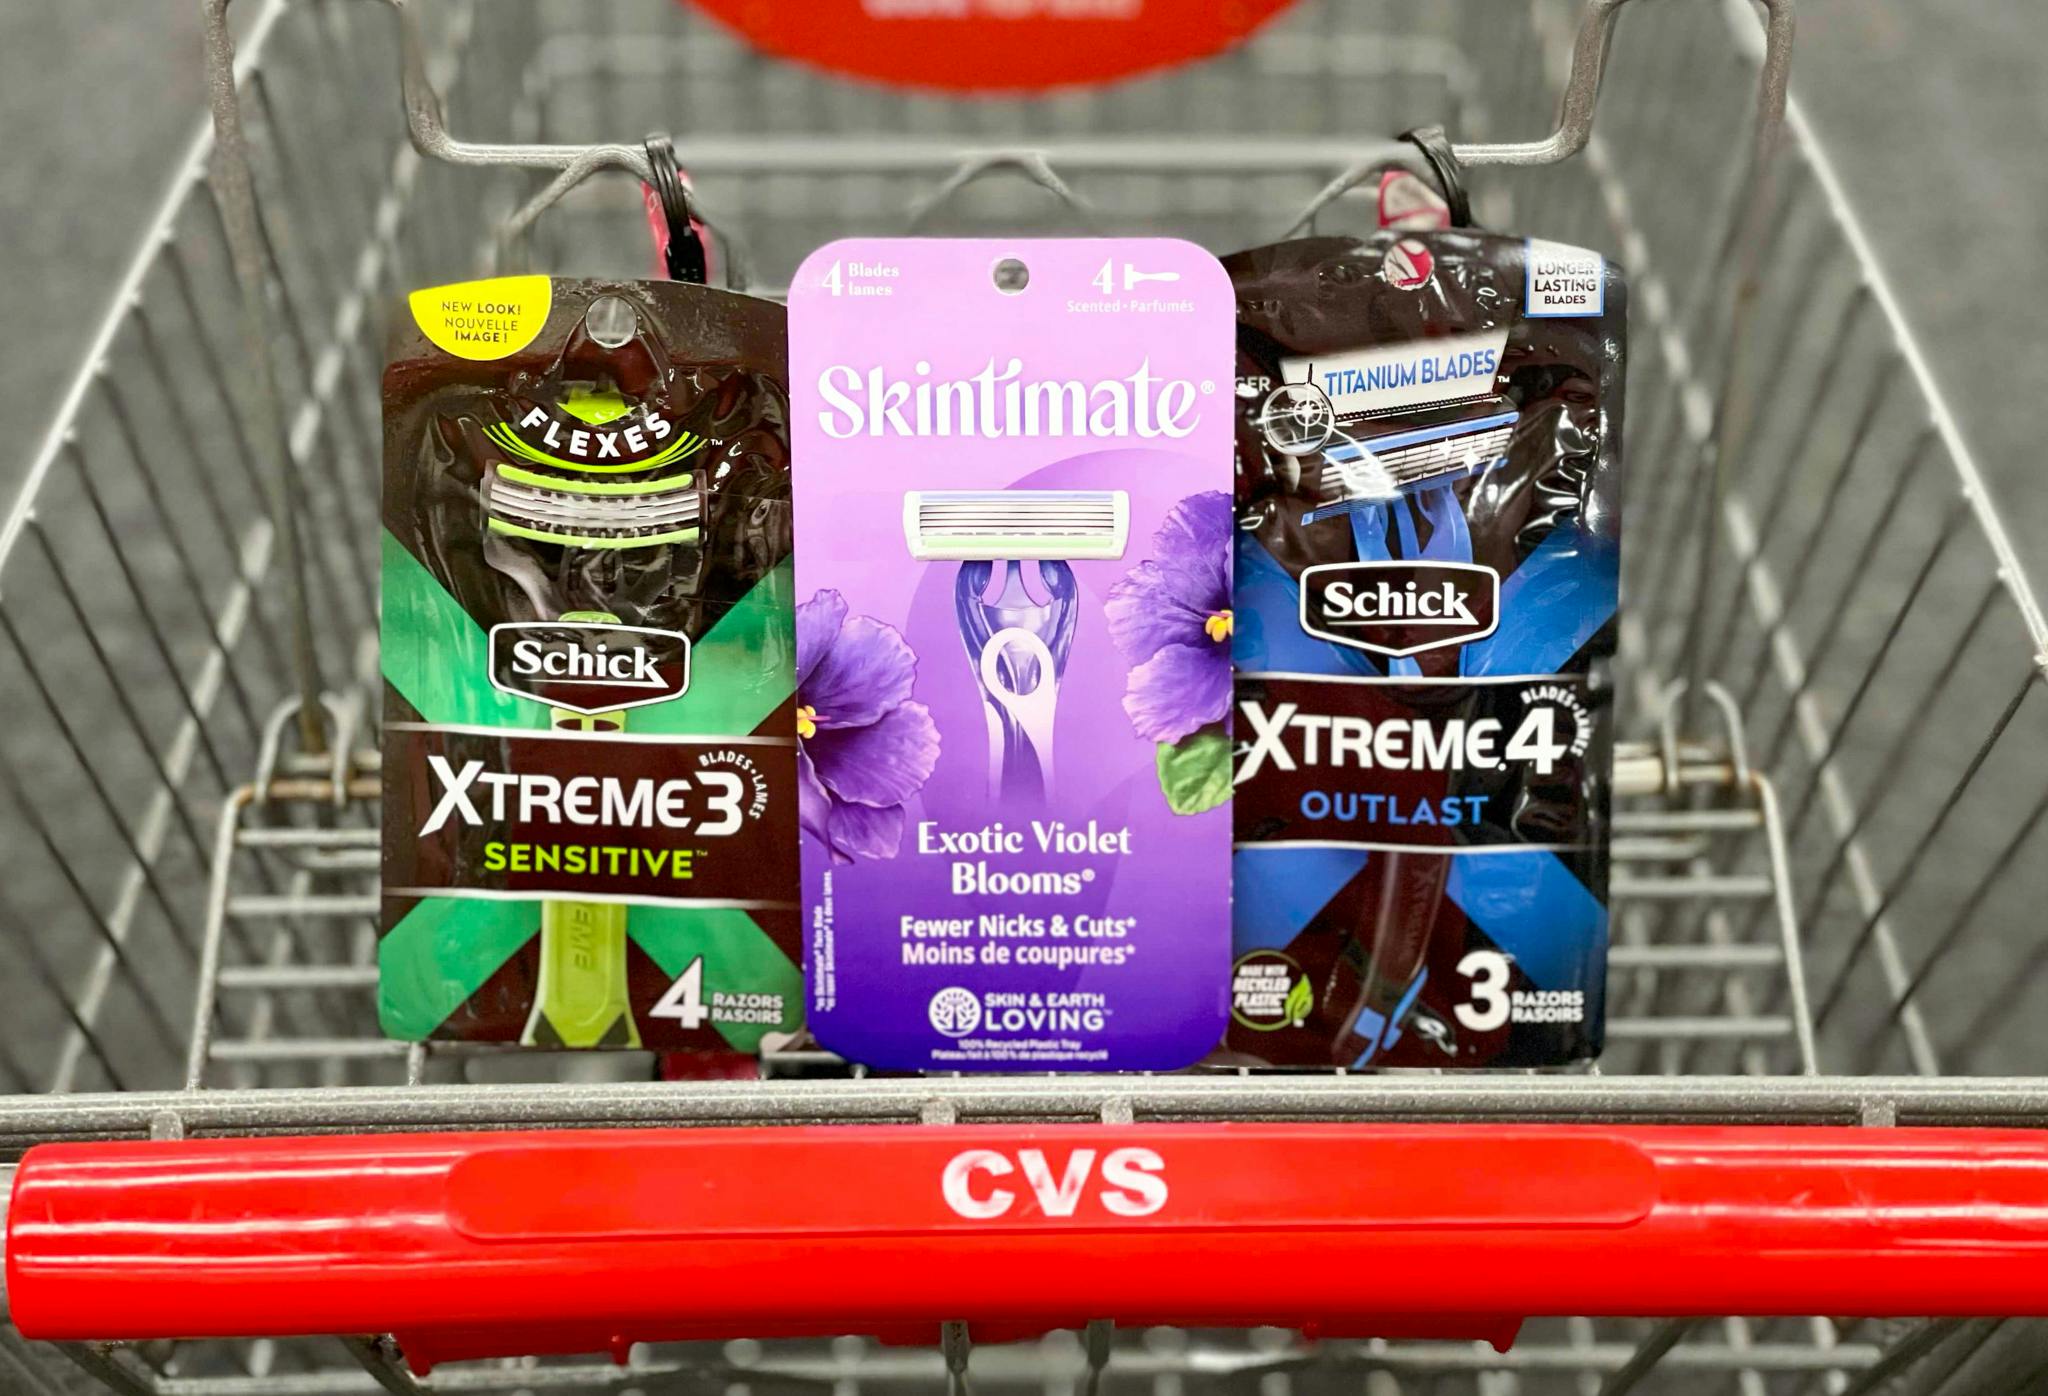 Packages of Schick Xtreme 3, Schick Xtreme 4, and Skintimate disposable razors sitting in the basket of a CVS cart.